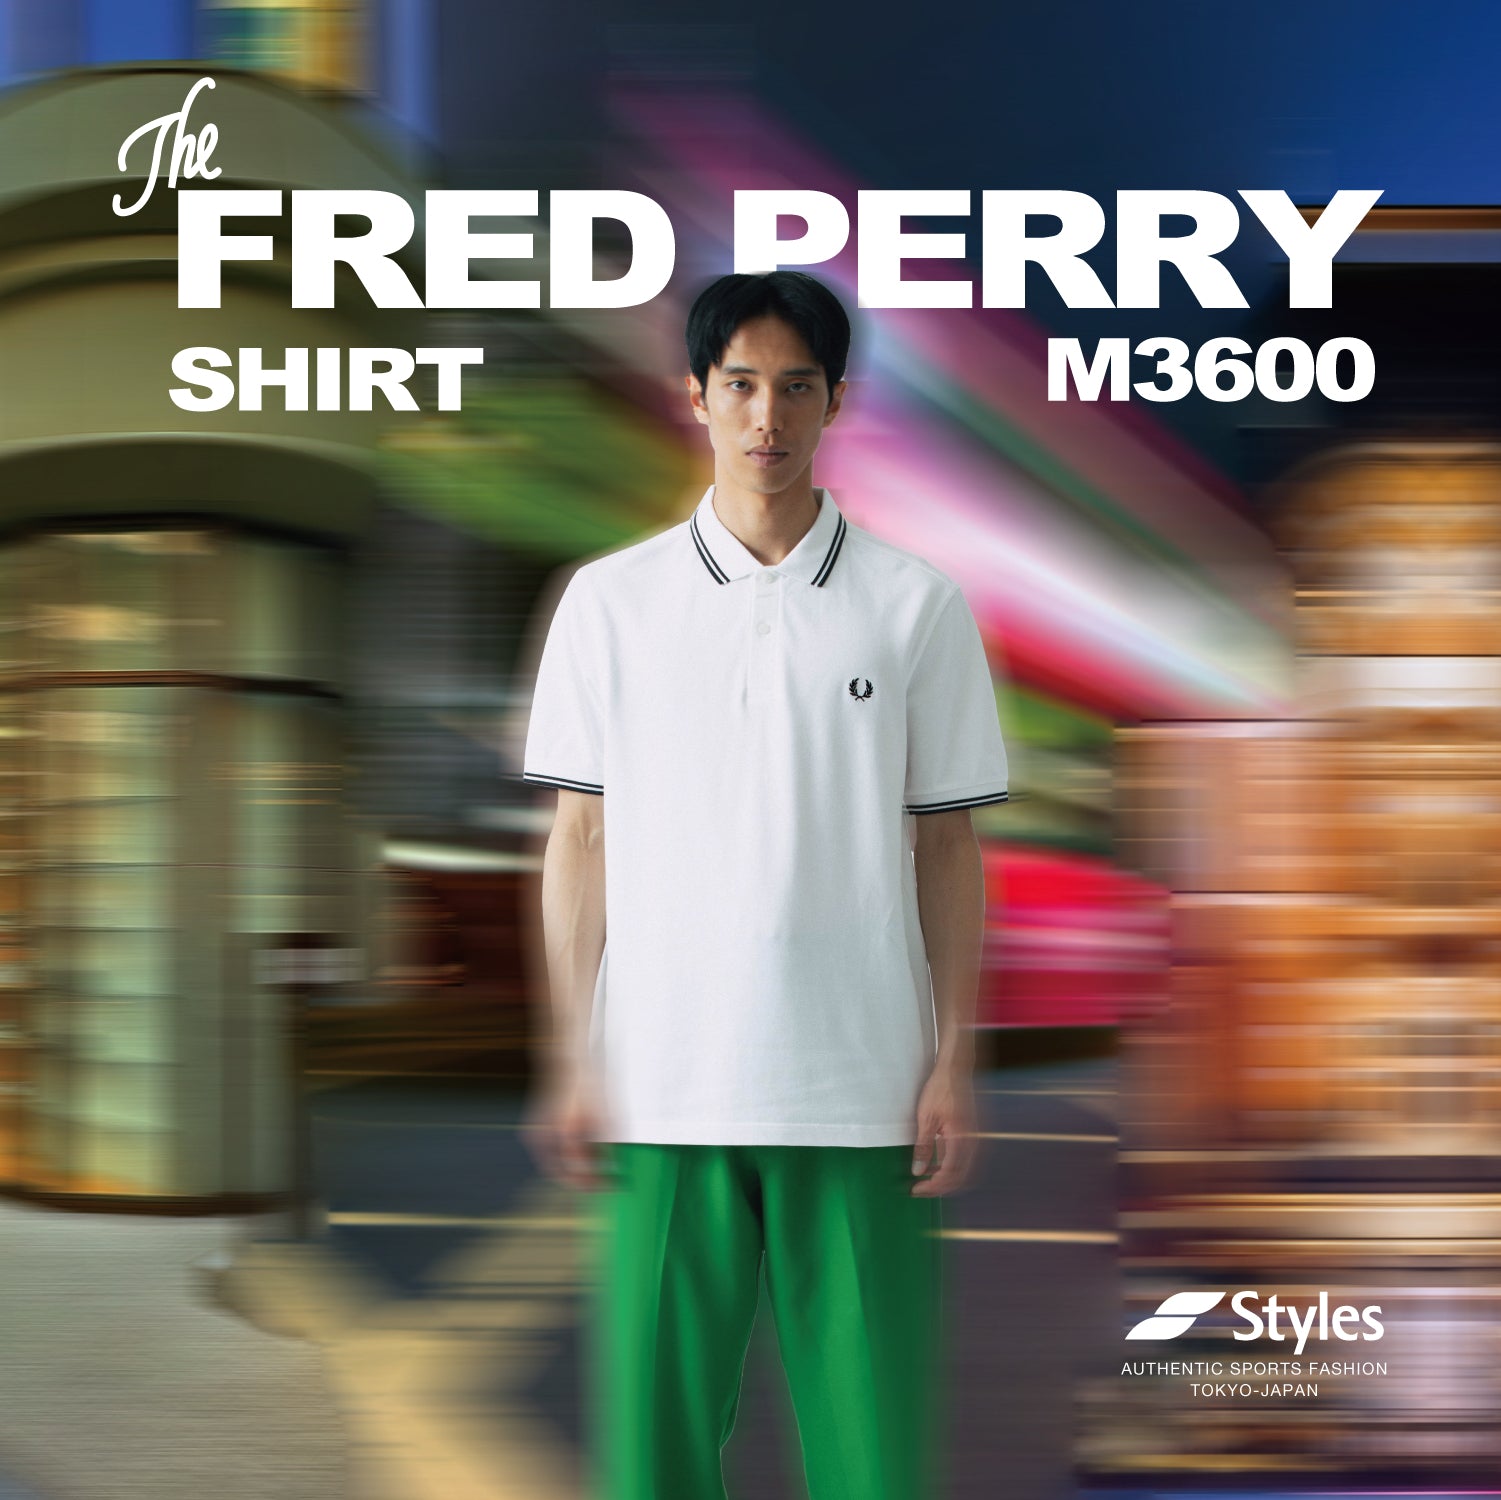 The FRED PERRY SHIRT M3600